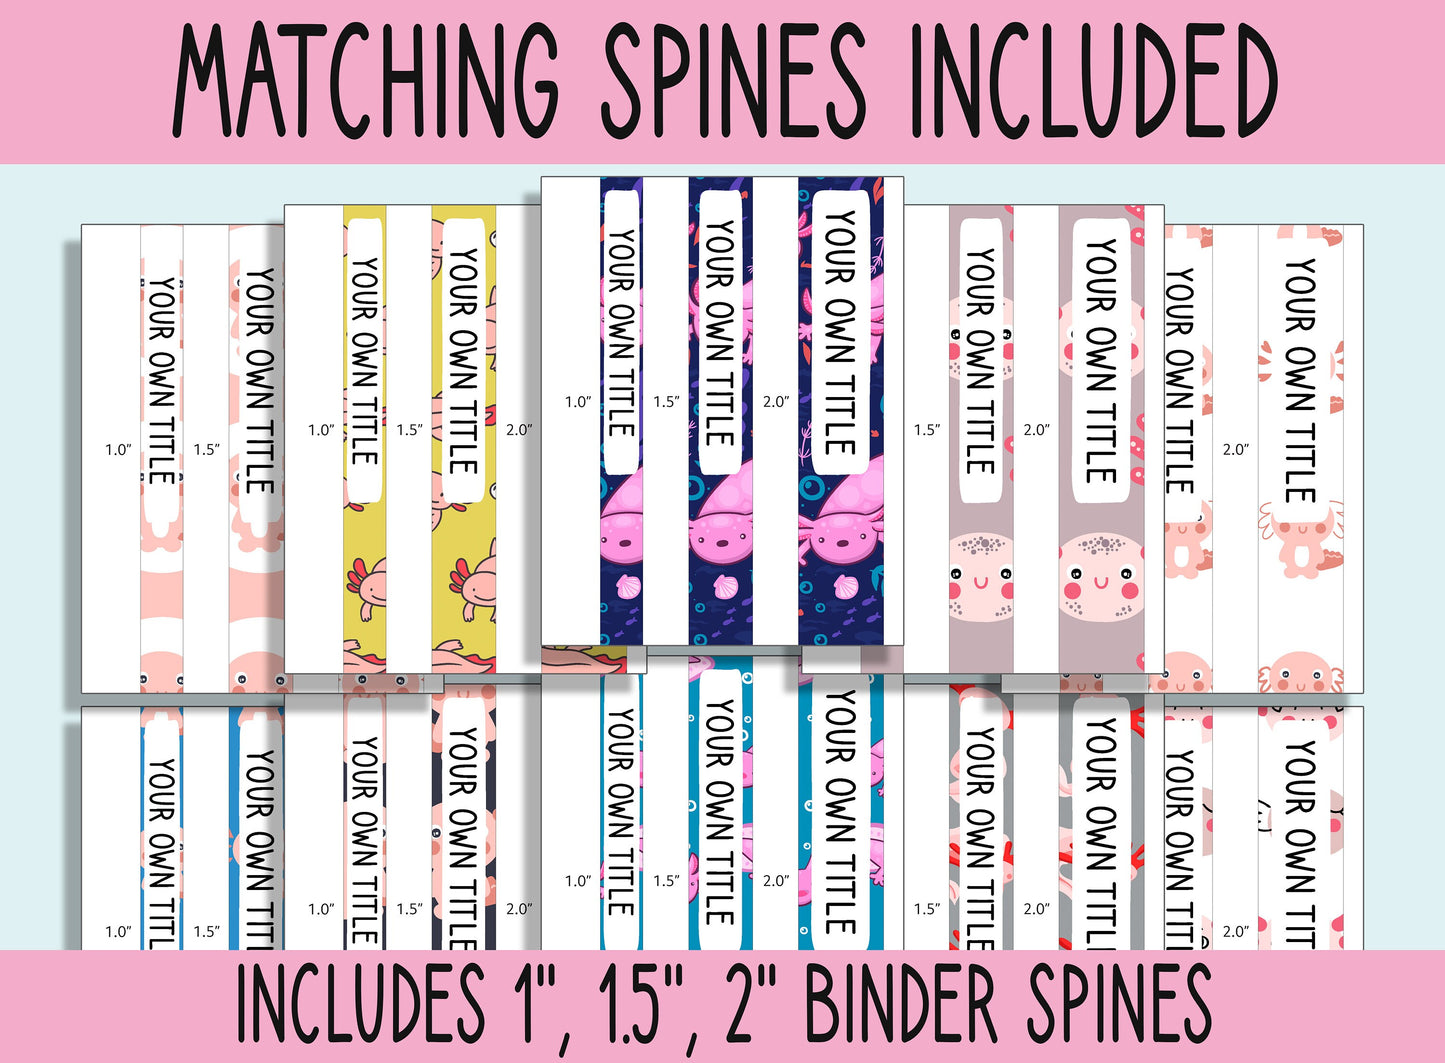 10 Editable Axolotl Binder Covers, Includes 1", 1.5", 2" Spines, Available in A4 & US Letter, Editing with PowerPoint or PDF Reader